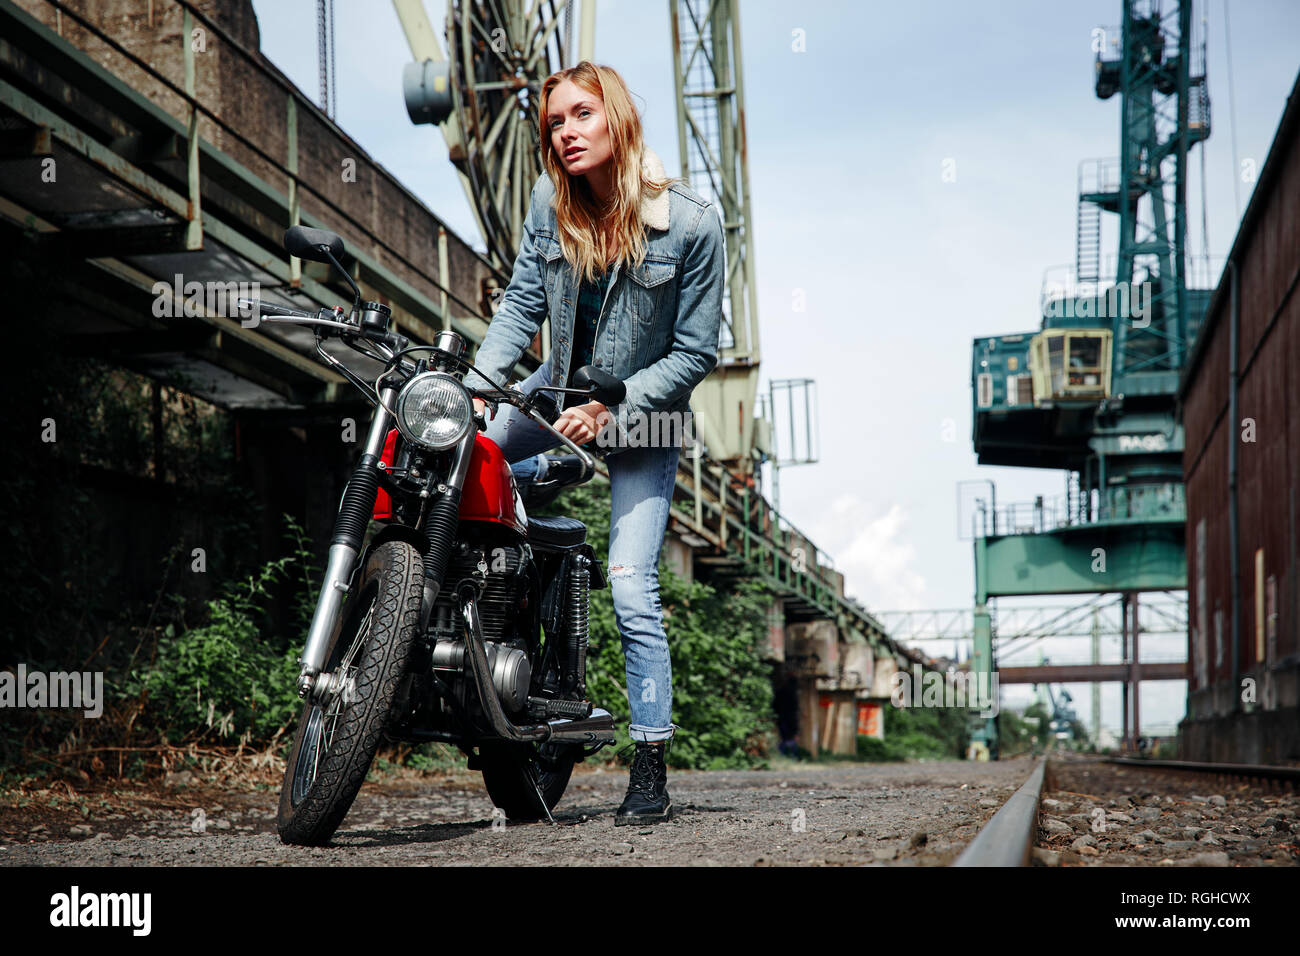 Portrait of confident young woman getting on motorcycle Stock Photo